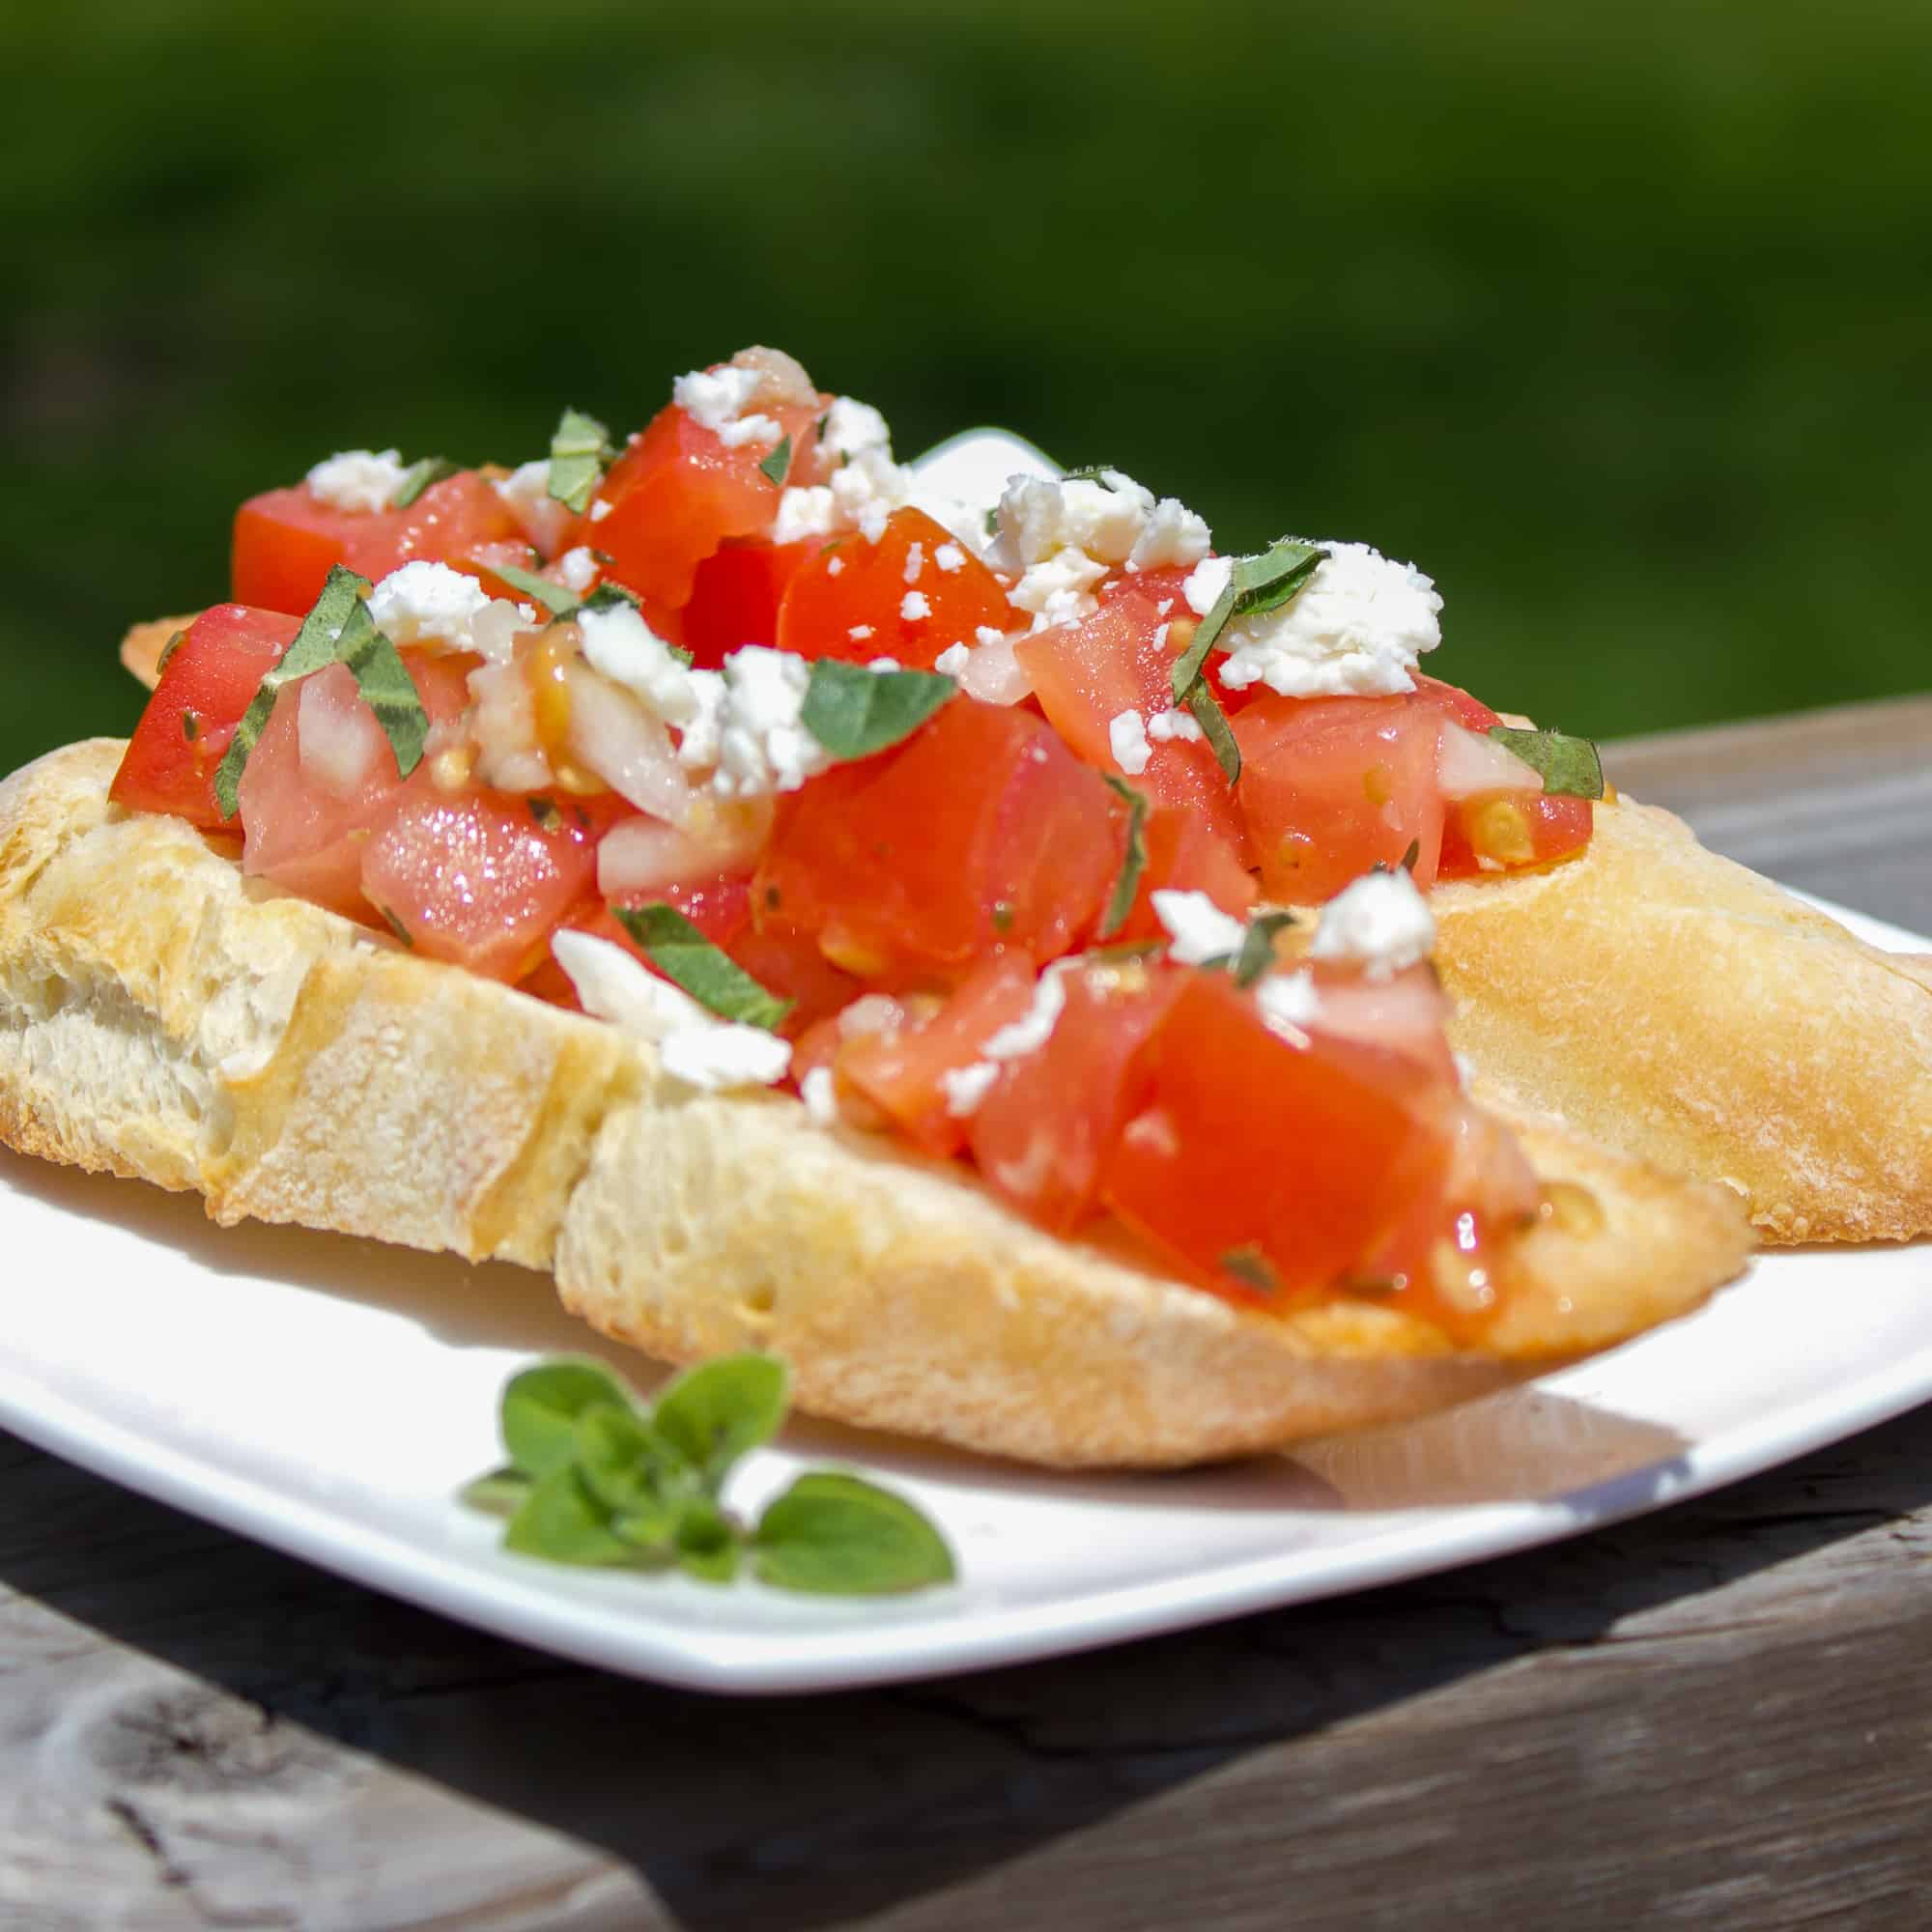 Recipe for how to make bruschetta bread with roma tomatoes, garlic, onion, lemon juice and olive oil. Topped with feta and oregano on a toasted slice of French baguette.